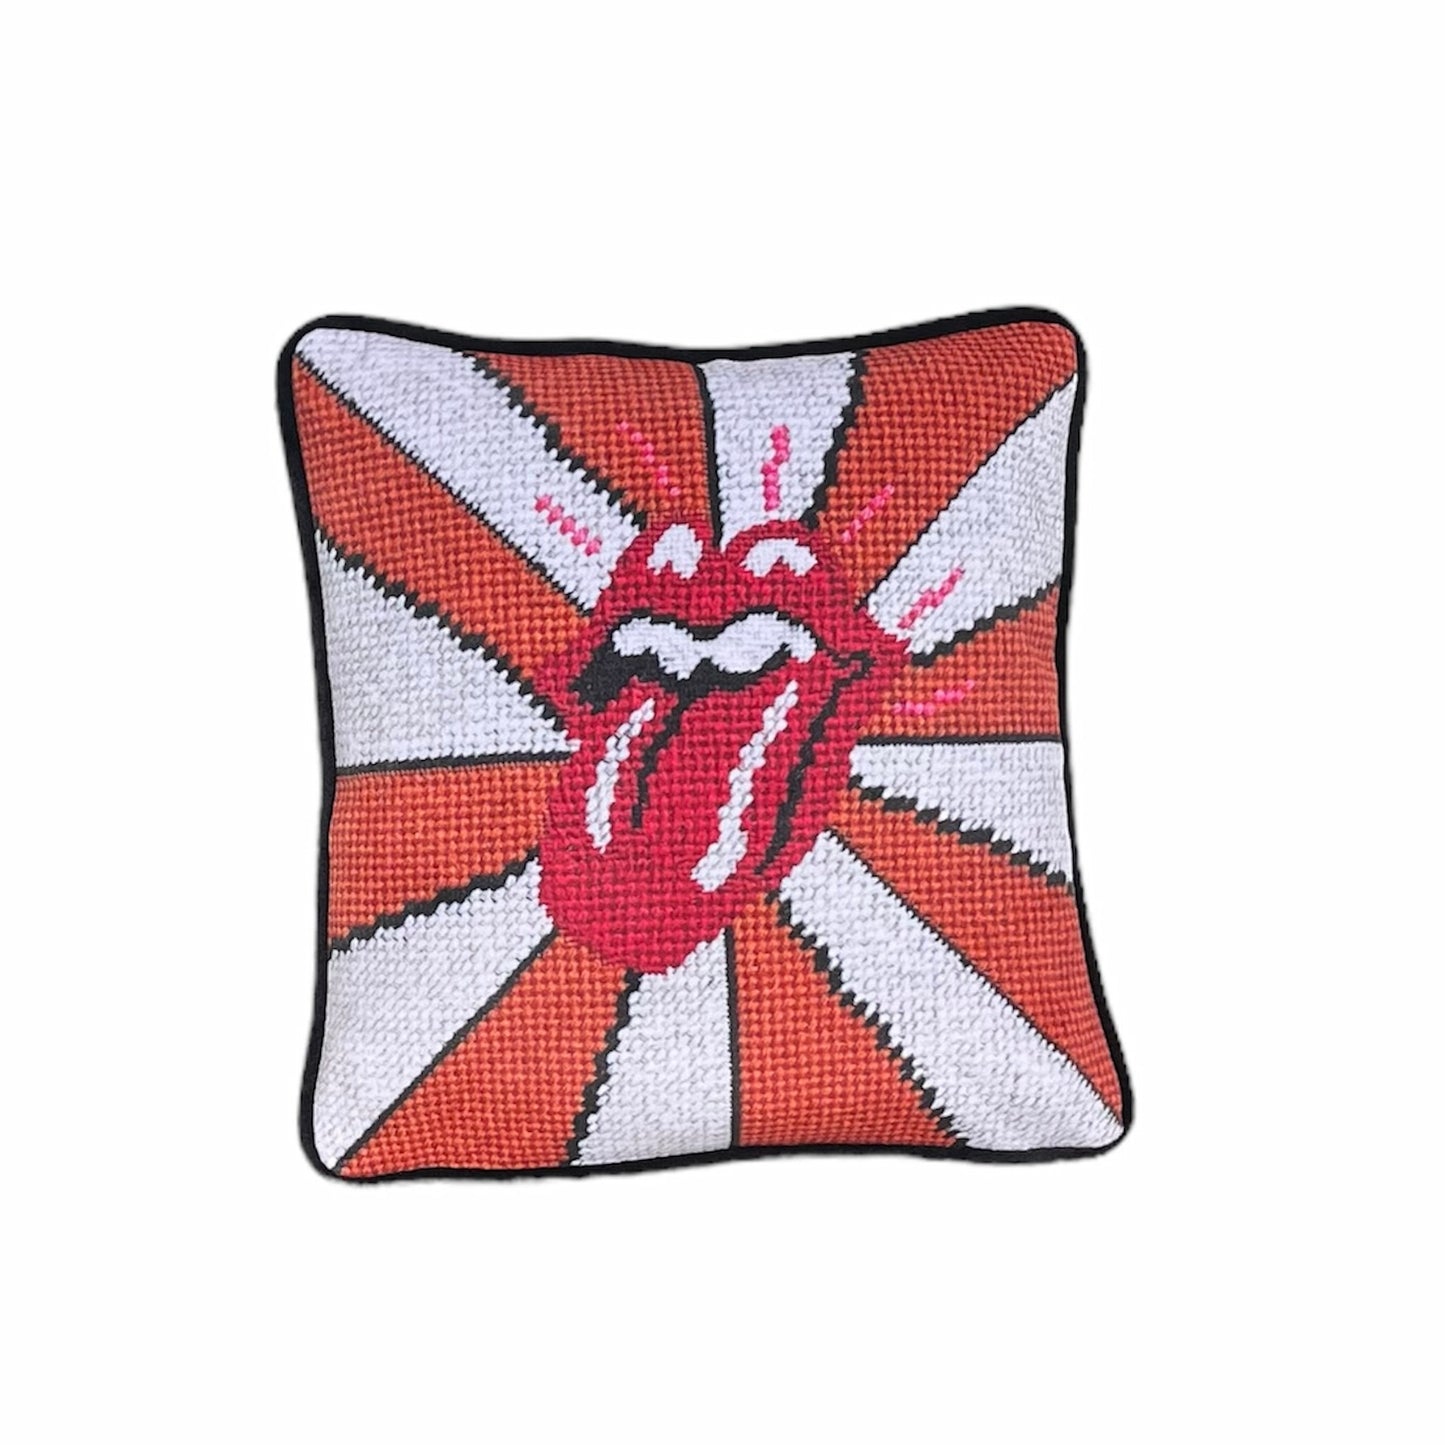 the rolling stones tongue with pink highlights on a gold and white fanned out backgroundiconic rolling stones tongue with carousel gold and white bands, hot pink highlights